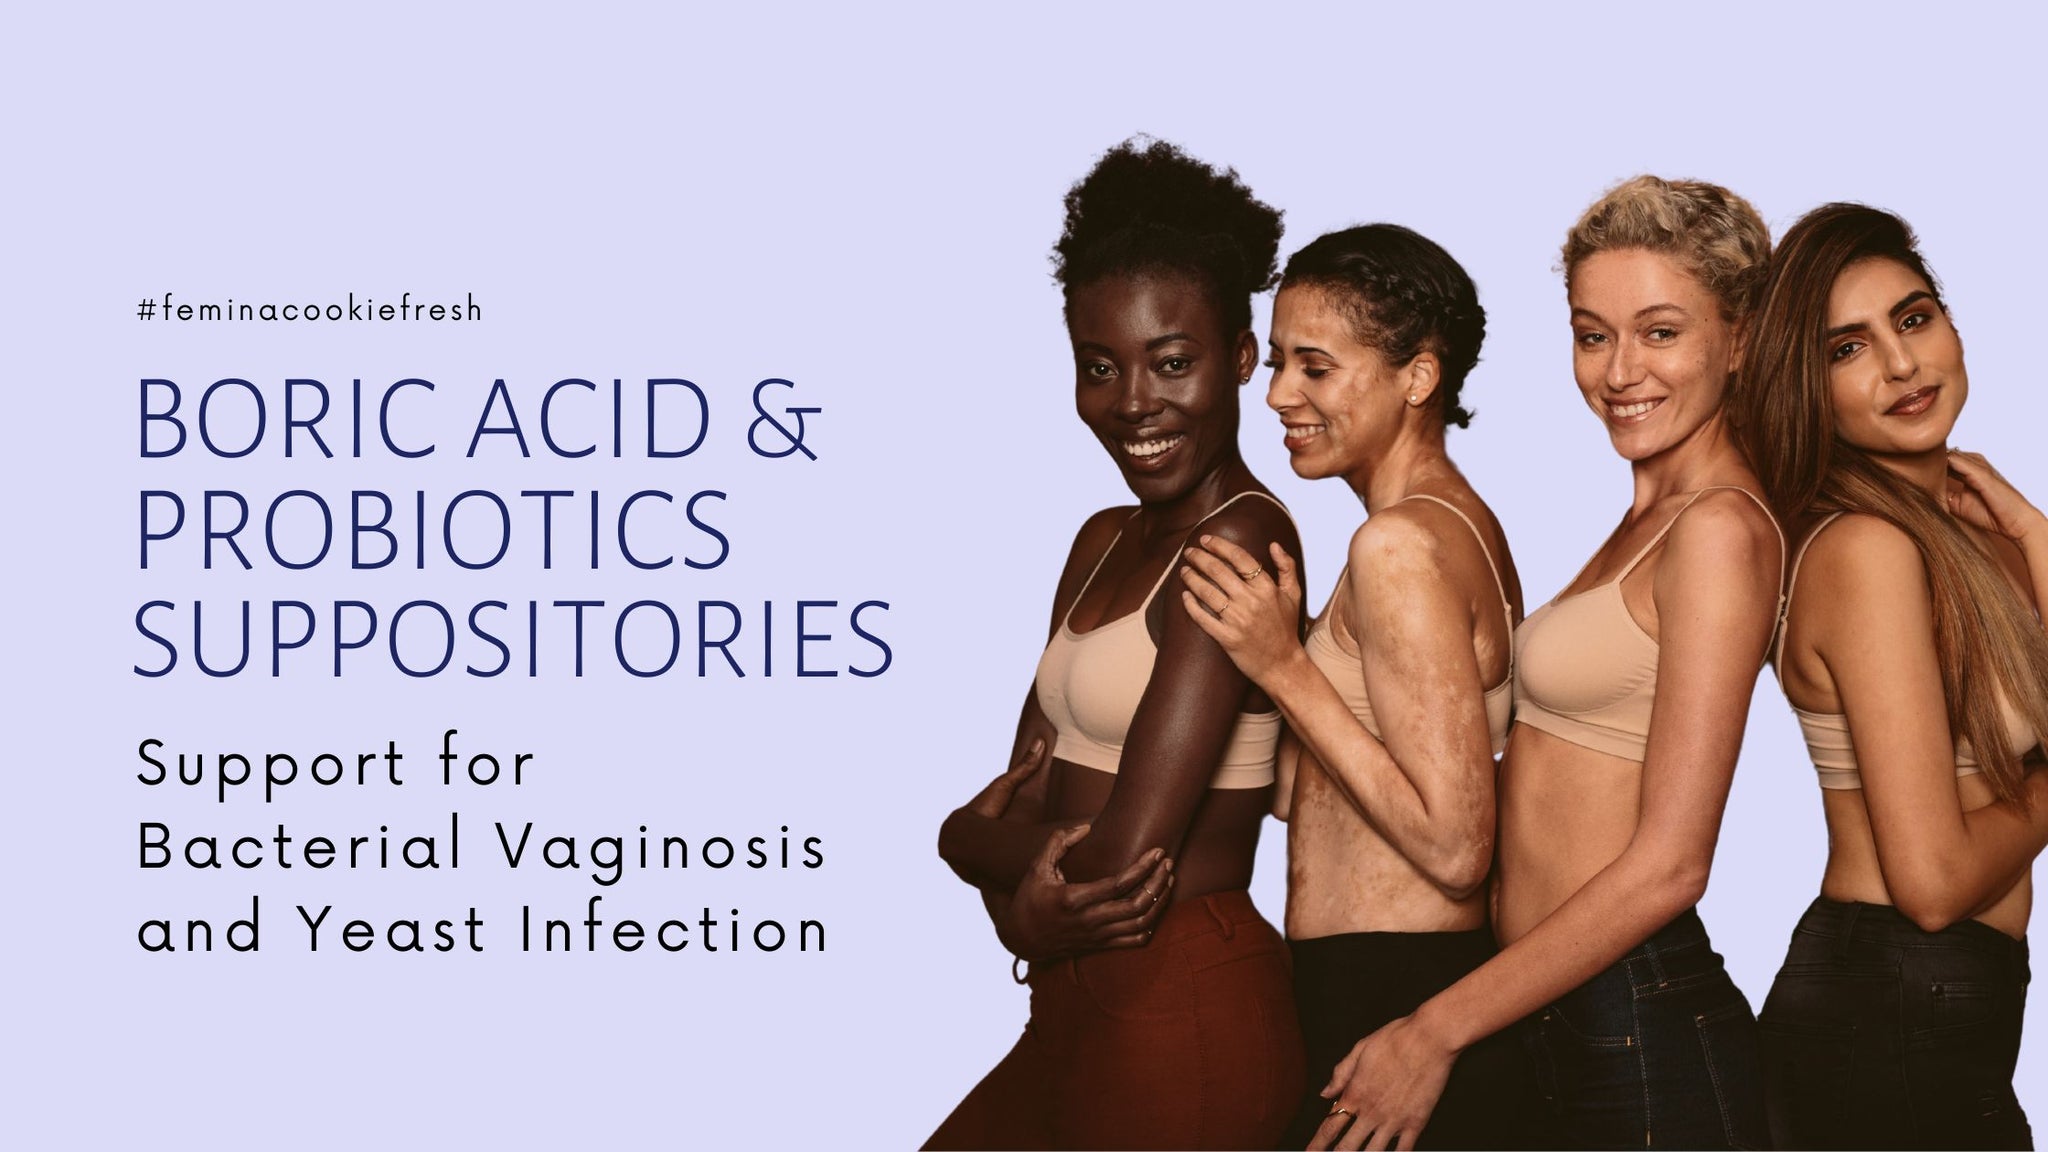 An Introduction to Boric Acid and Probiotics for Bacterial Vaginosis and Yeast Infection in Under 10 Minutes